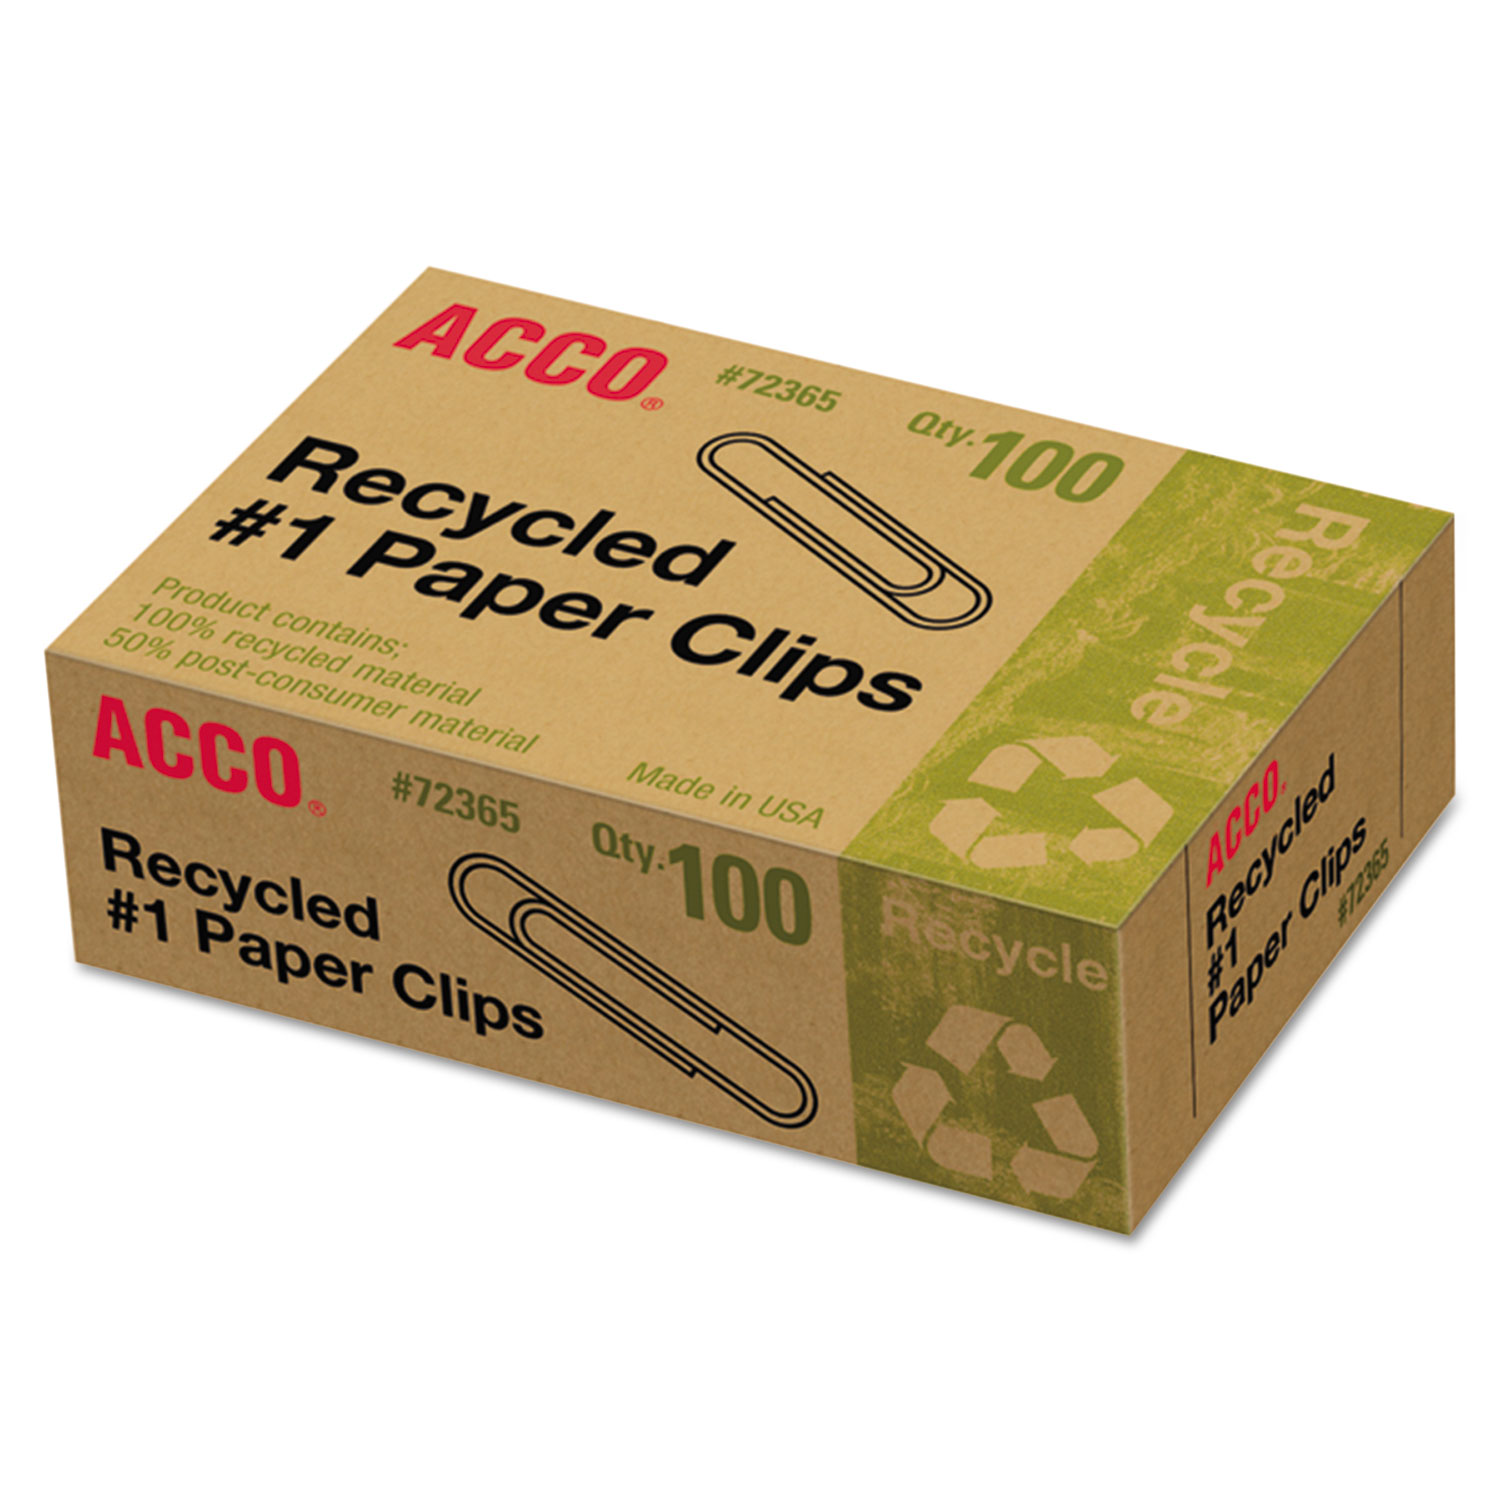 Recycled Paper Clips, Smooth, #1, 100/Box, 10 Boxes/Pack